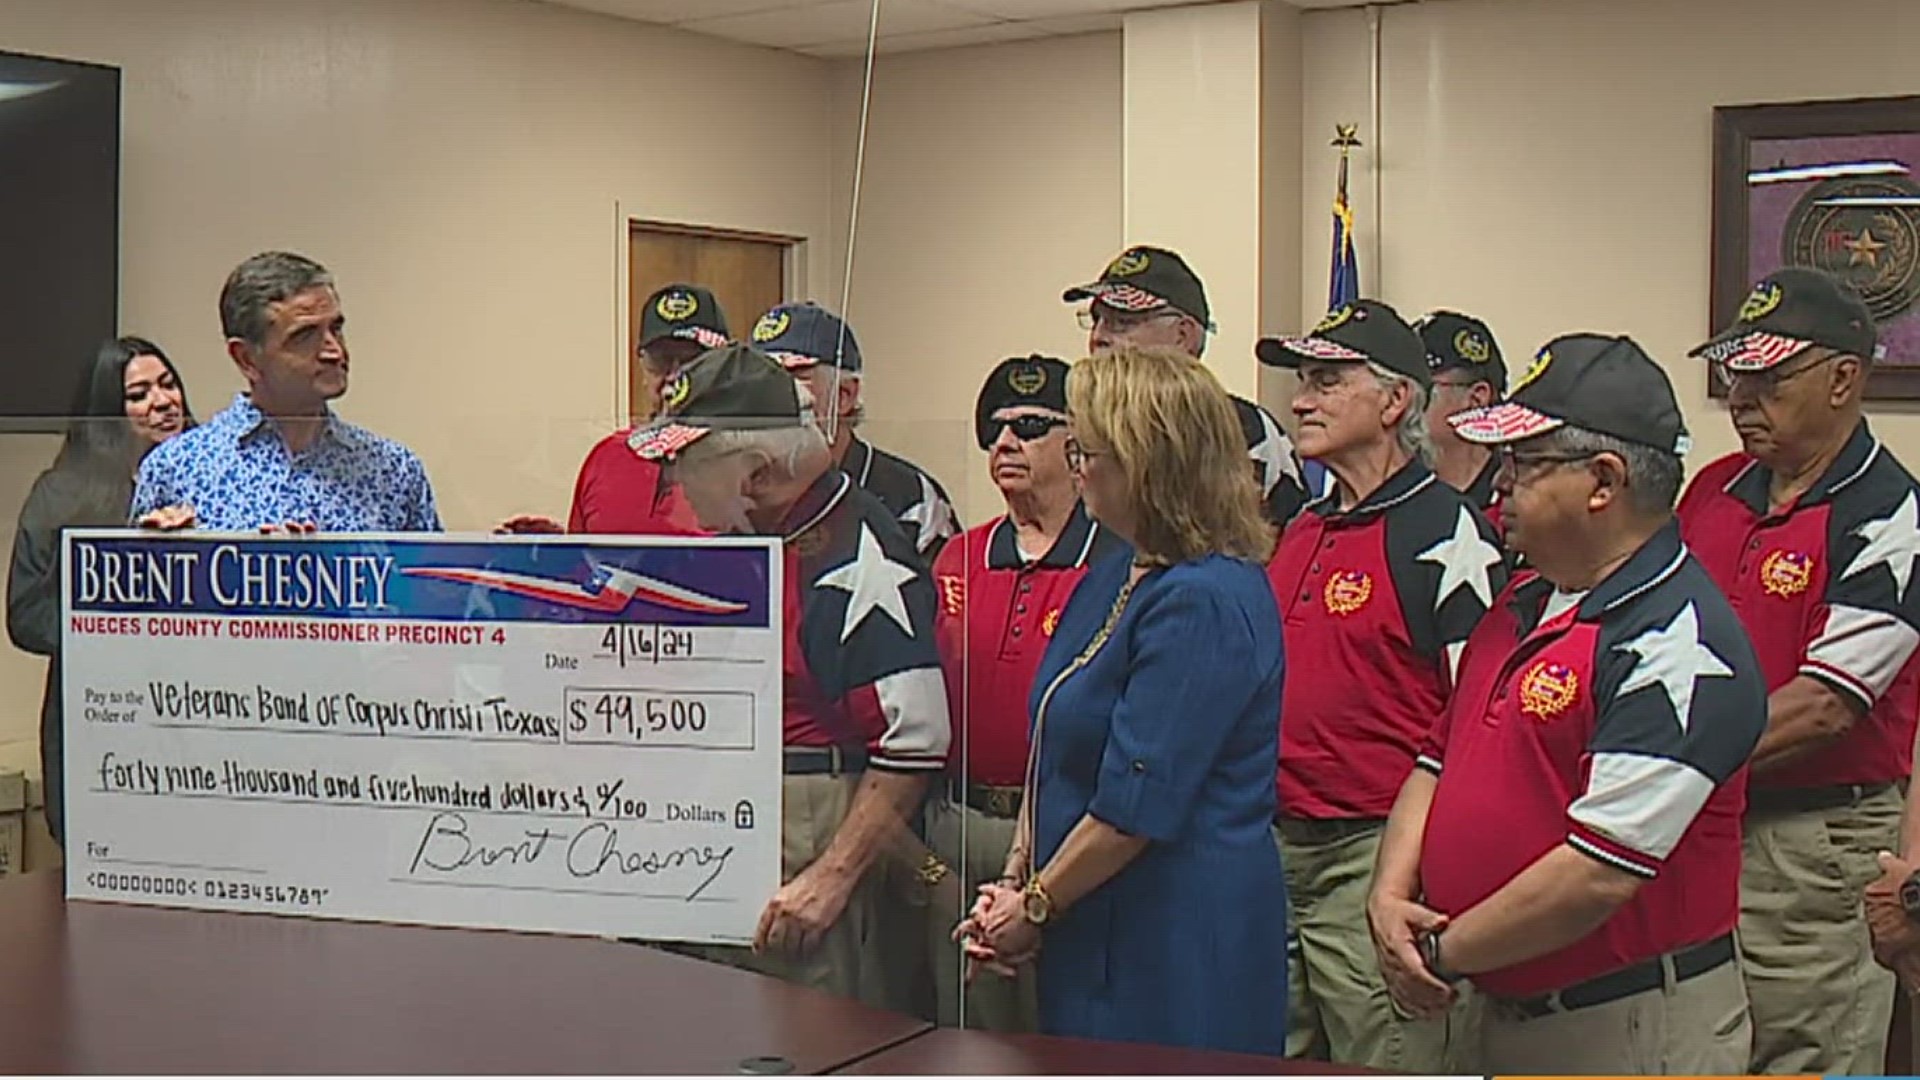 Nueces County Precinct 4 is awarding the band nearly $50,000 thousand dollars!